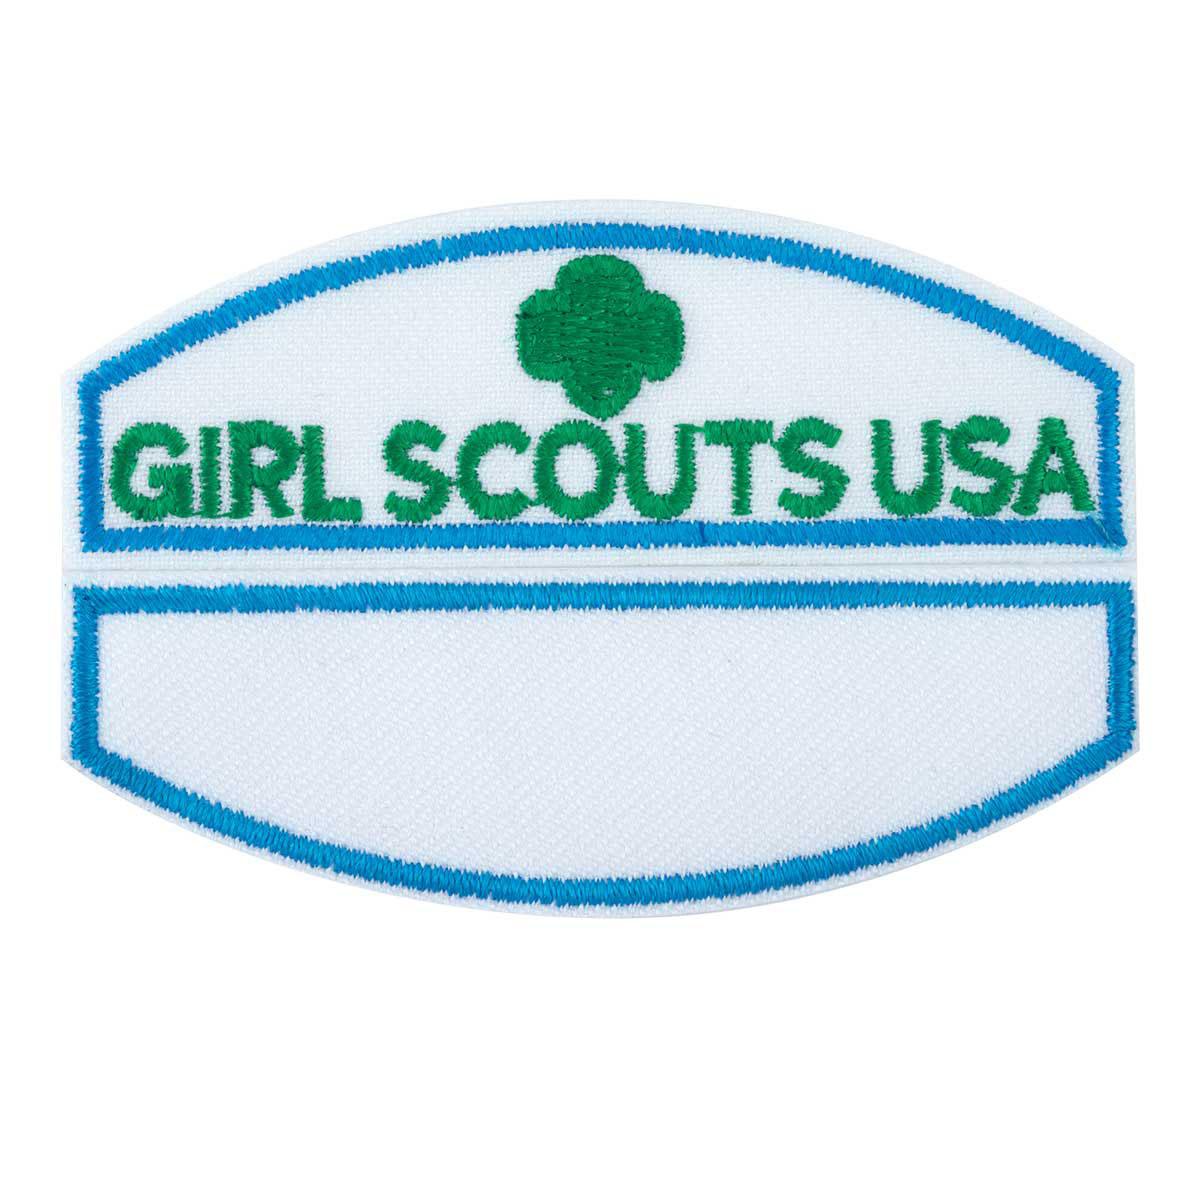 Details about  / Girl Scouts Embroidered Iron On Patch Confidence in Penn Laurel Girl Scouts